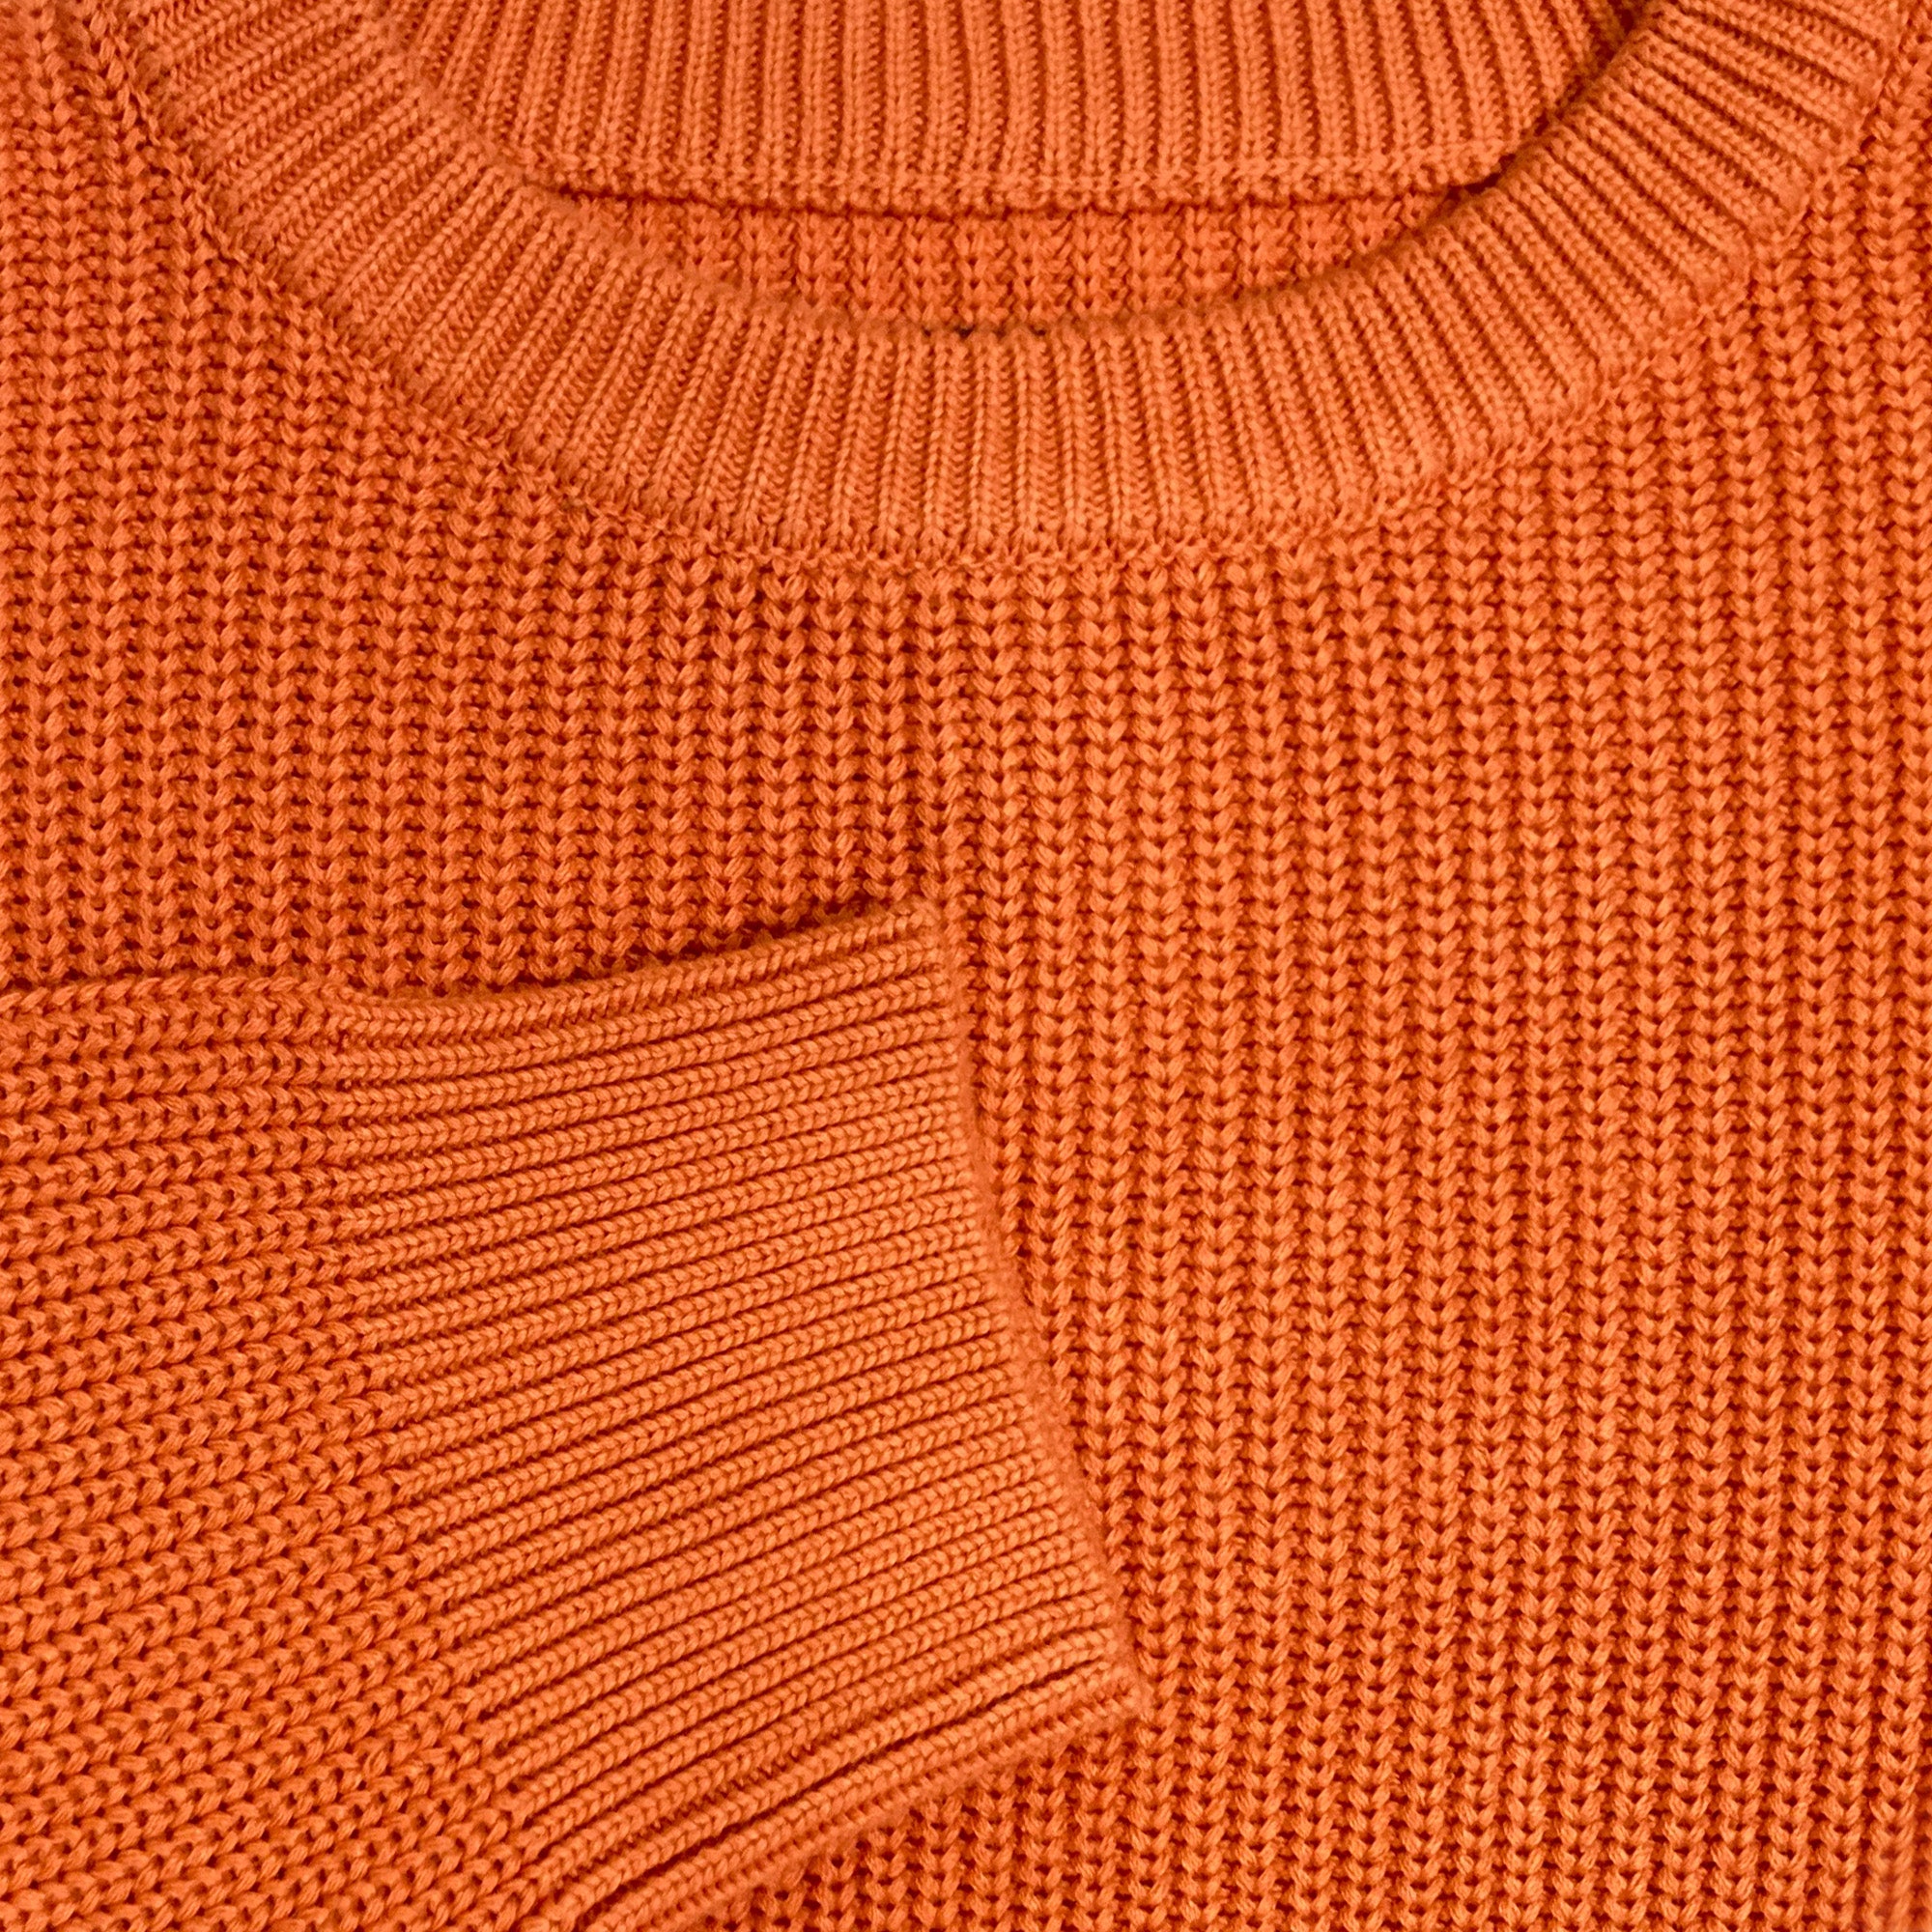 Detailed close-up of chest and cuff of a heavy knit sweater in autumn orange.